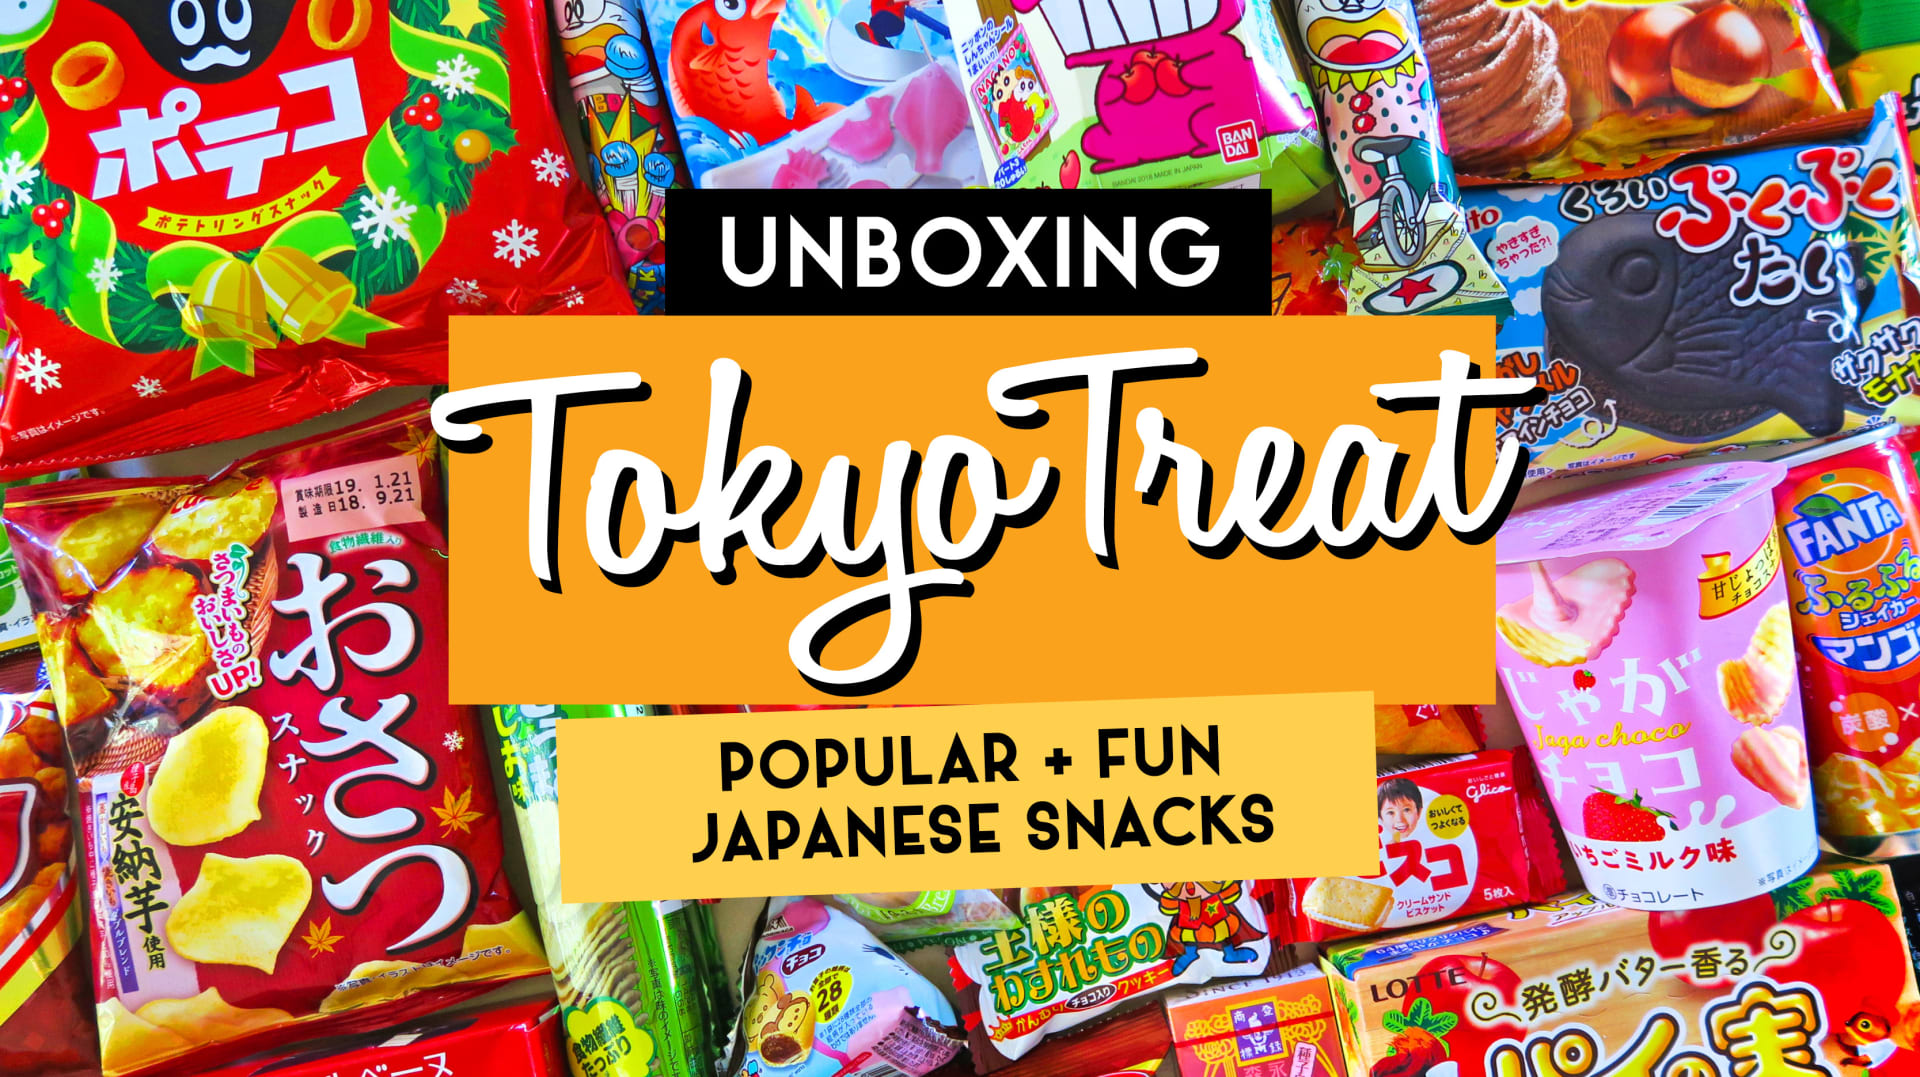 Tokyo Treat June 2021 Subscription Box Review + Coupon - Hello Subscription